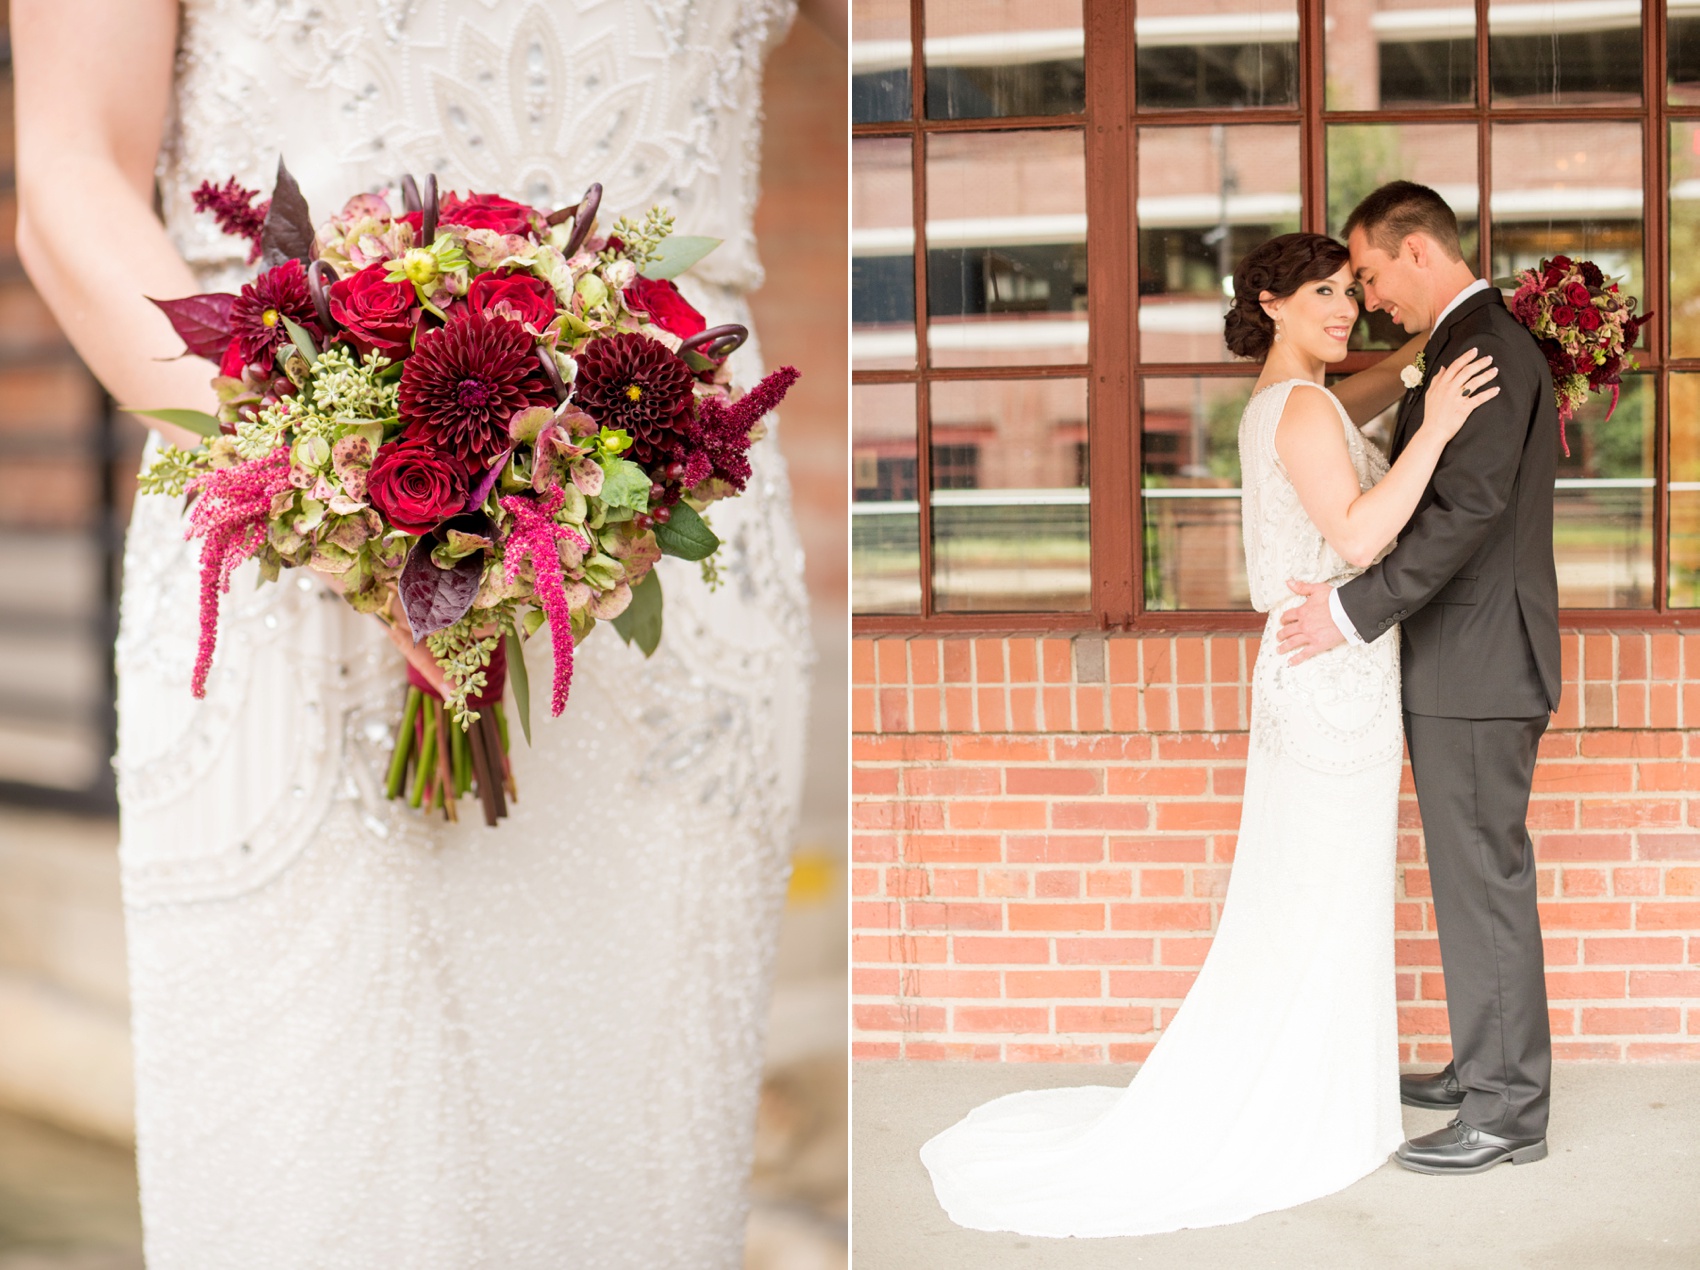 Bay 7 wedding photos by Mikkel Paige Photography. Raleigh wedding photographer captures the bride and groom's industrial outdoor portraits and bride's romantic red bouquet.